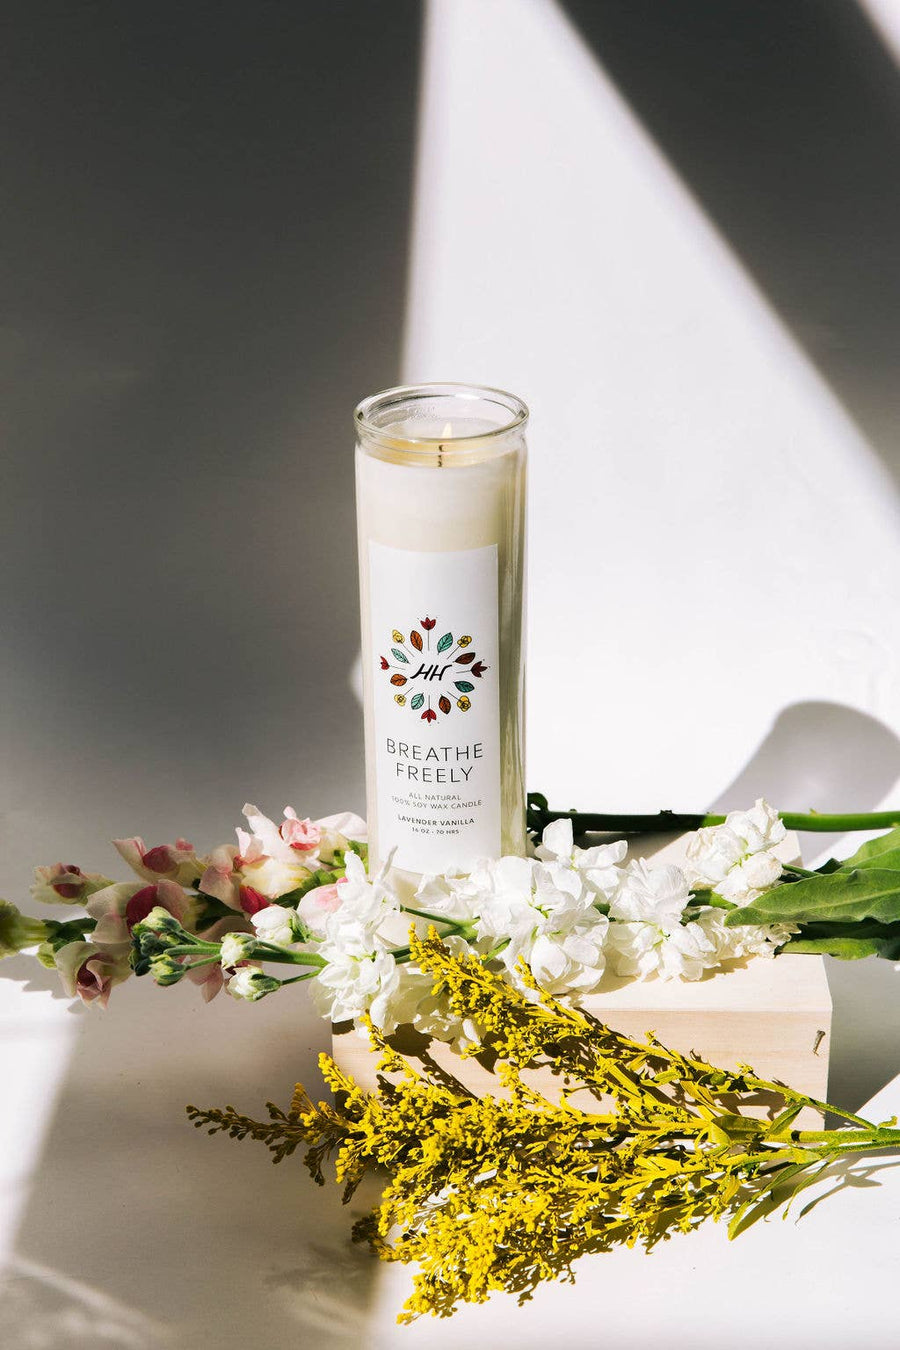 Breathe Freely Prayer Candle With Wildflowers Surrounding